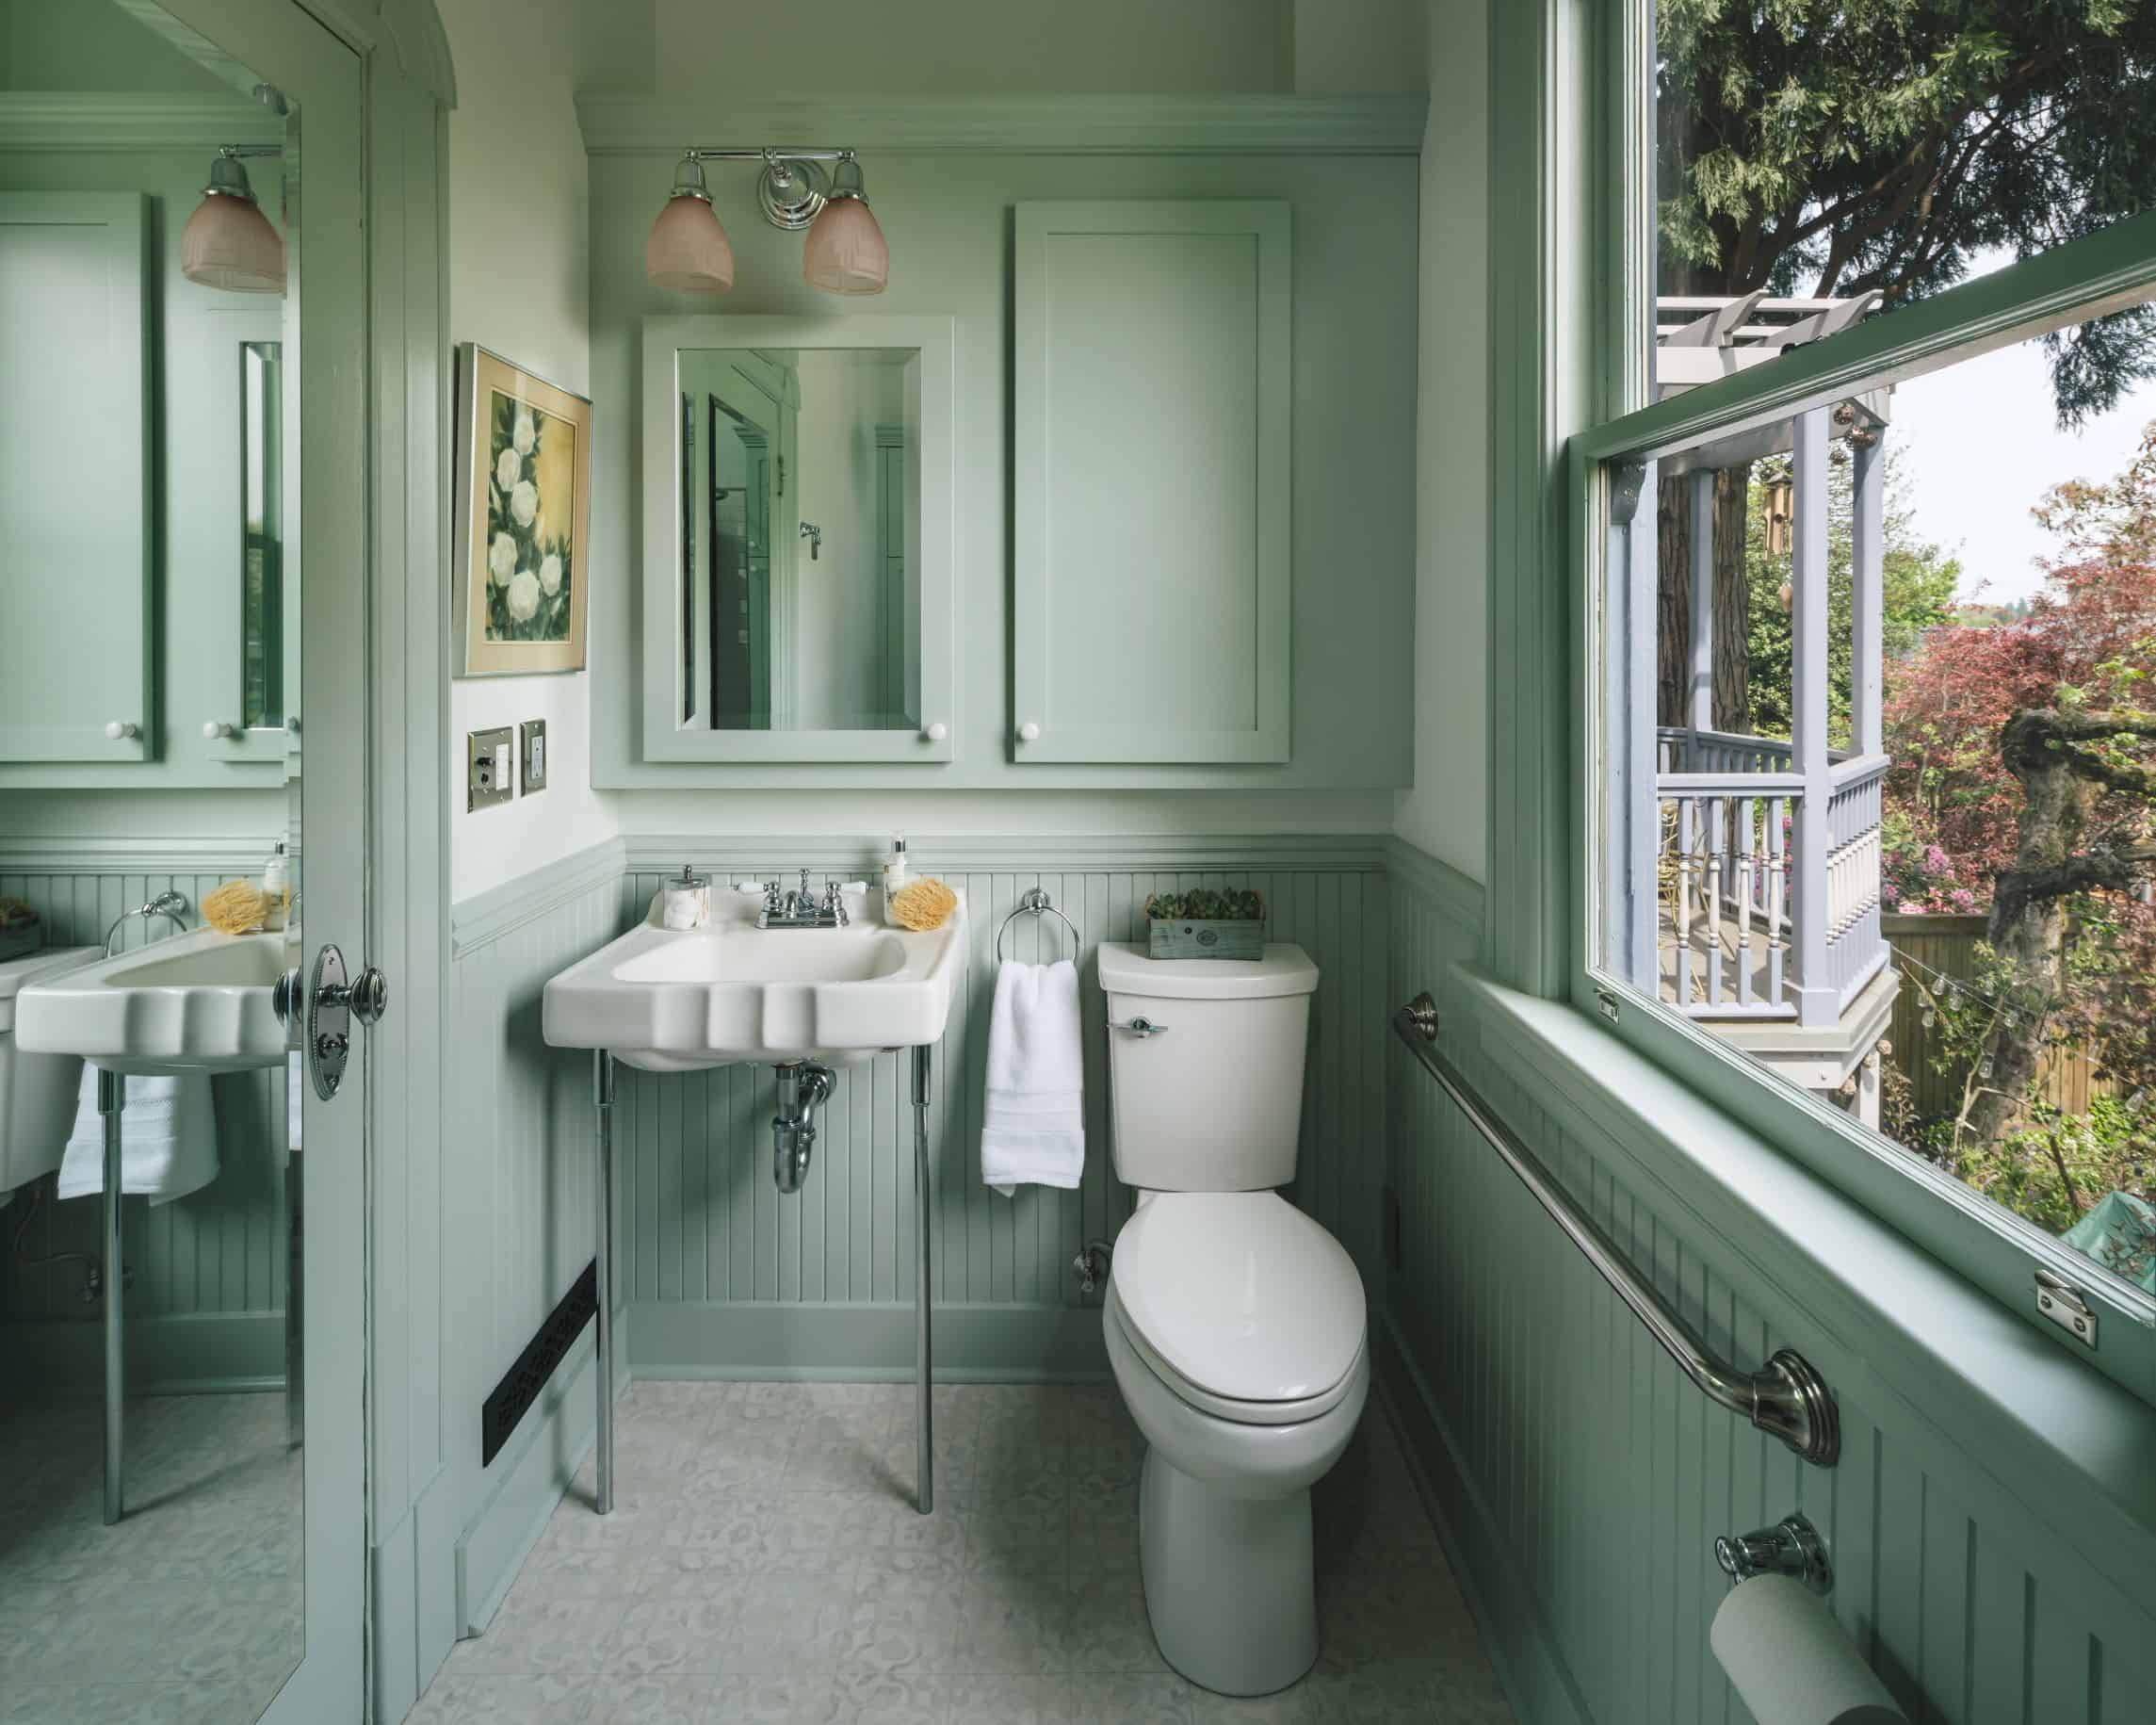 Small Bathroom Remodeled in 1900s Victorian